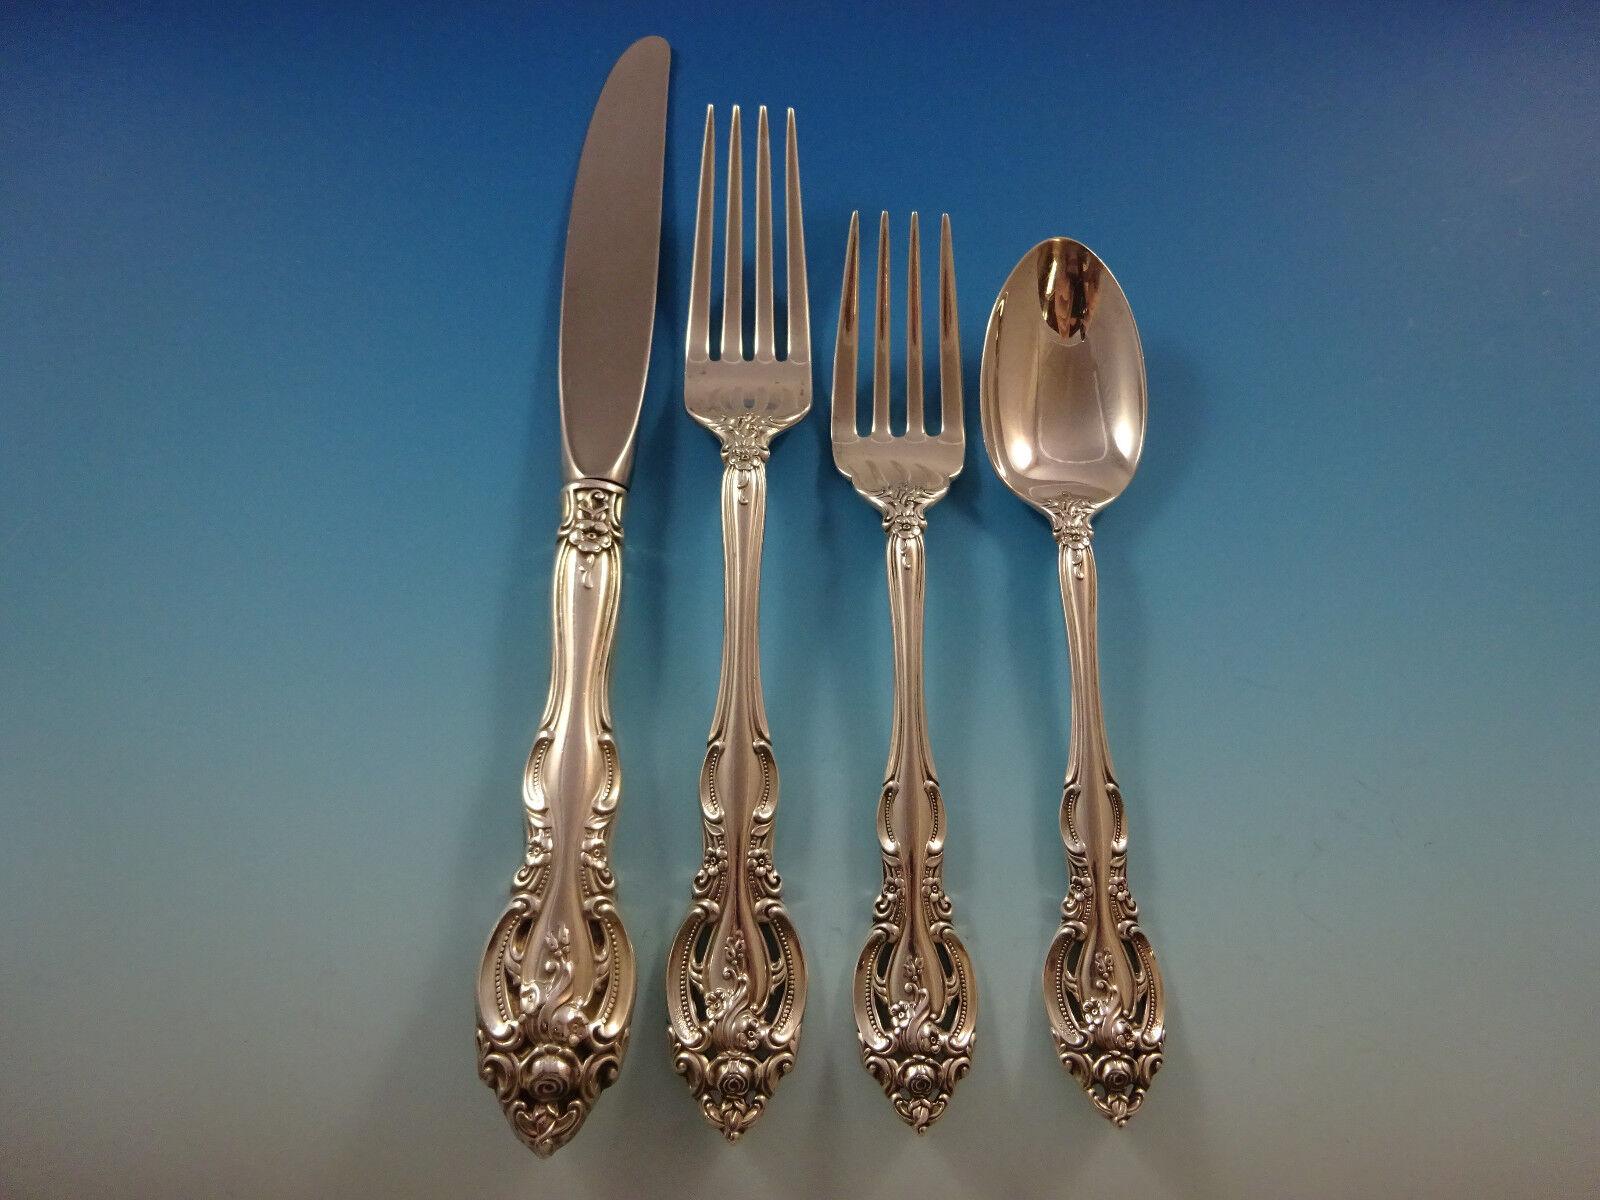 La Scala by Gorham Sterling Silver Flatware Service For 8 Set 41 Pieces In Excellent Condition For Sale In Big Bend, WI